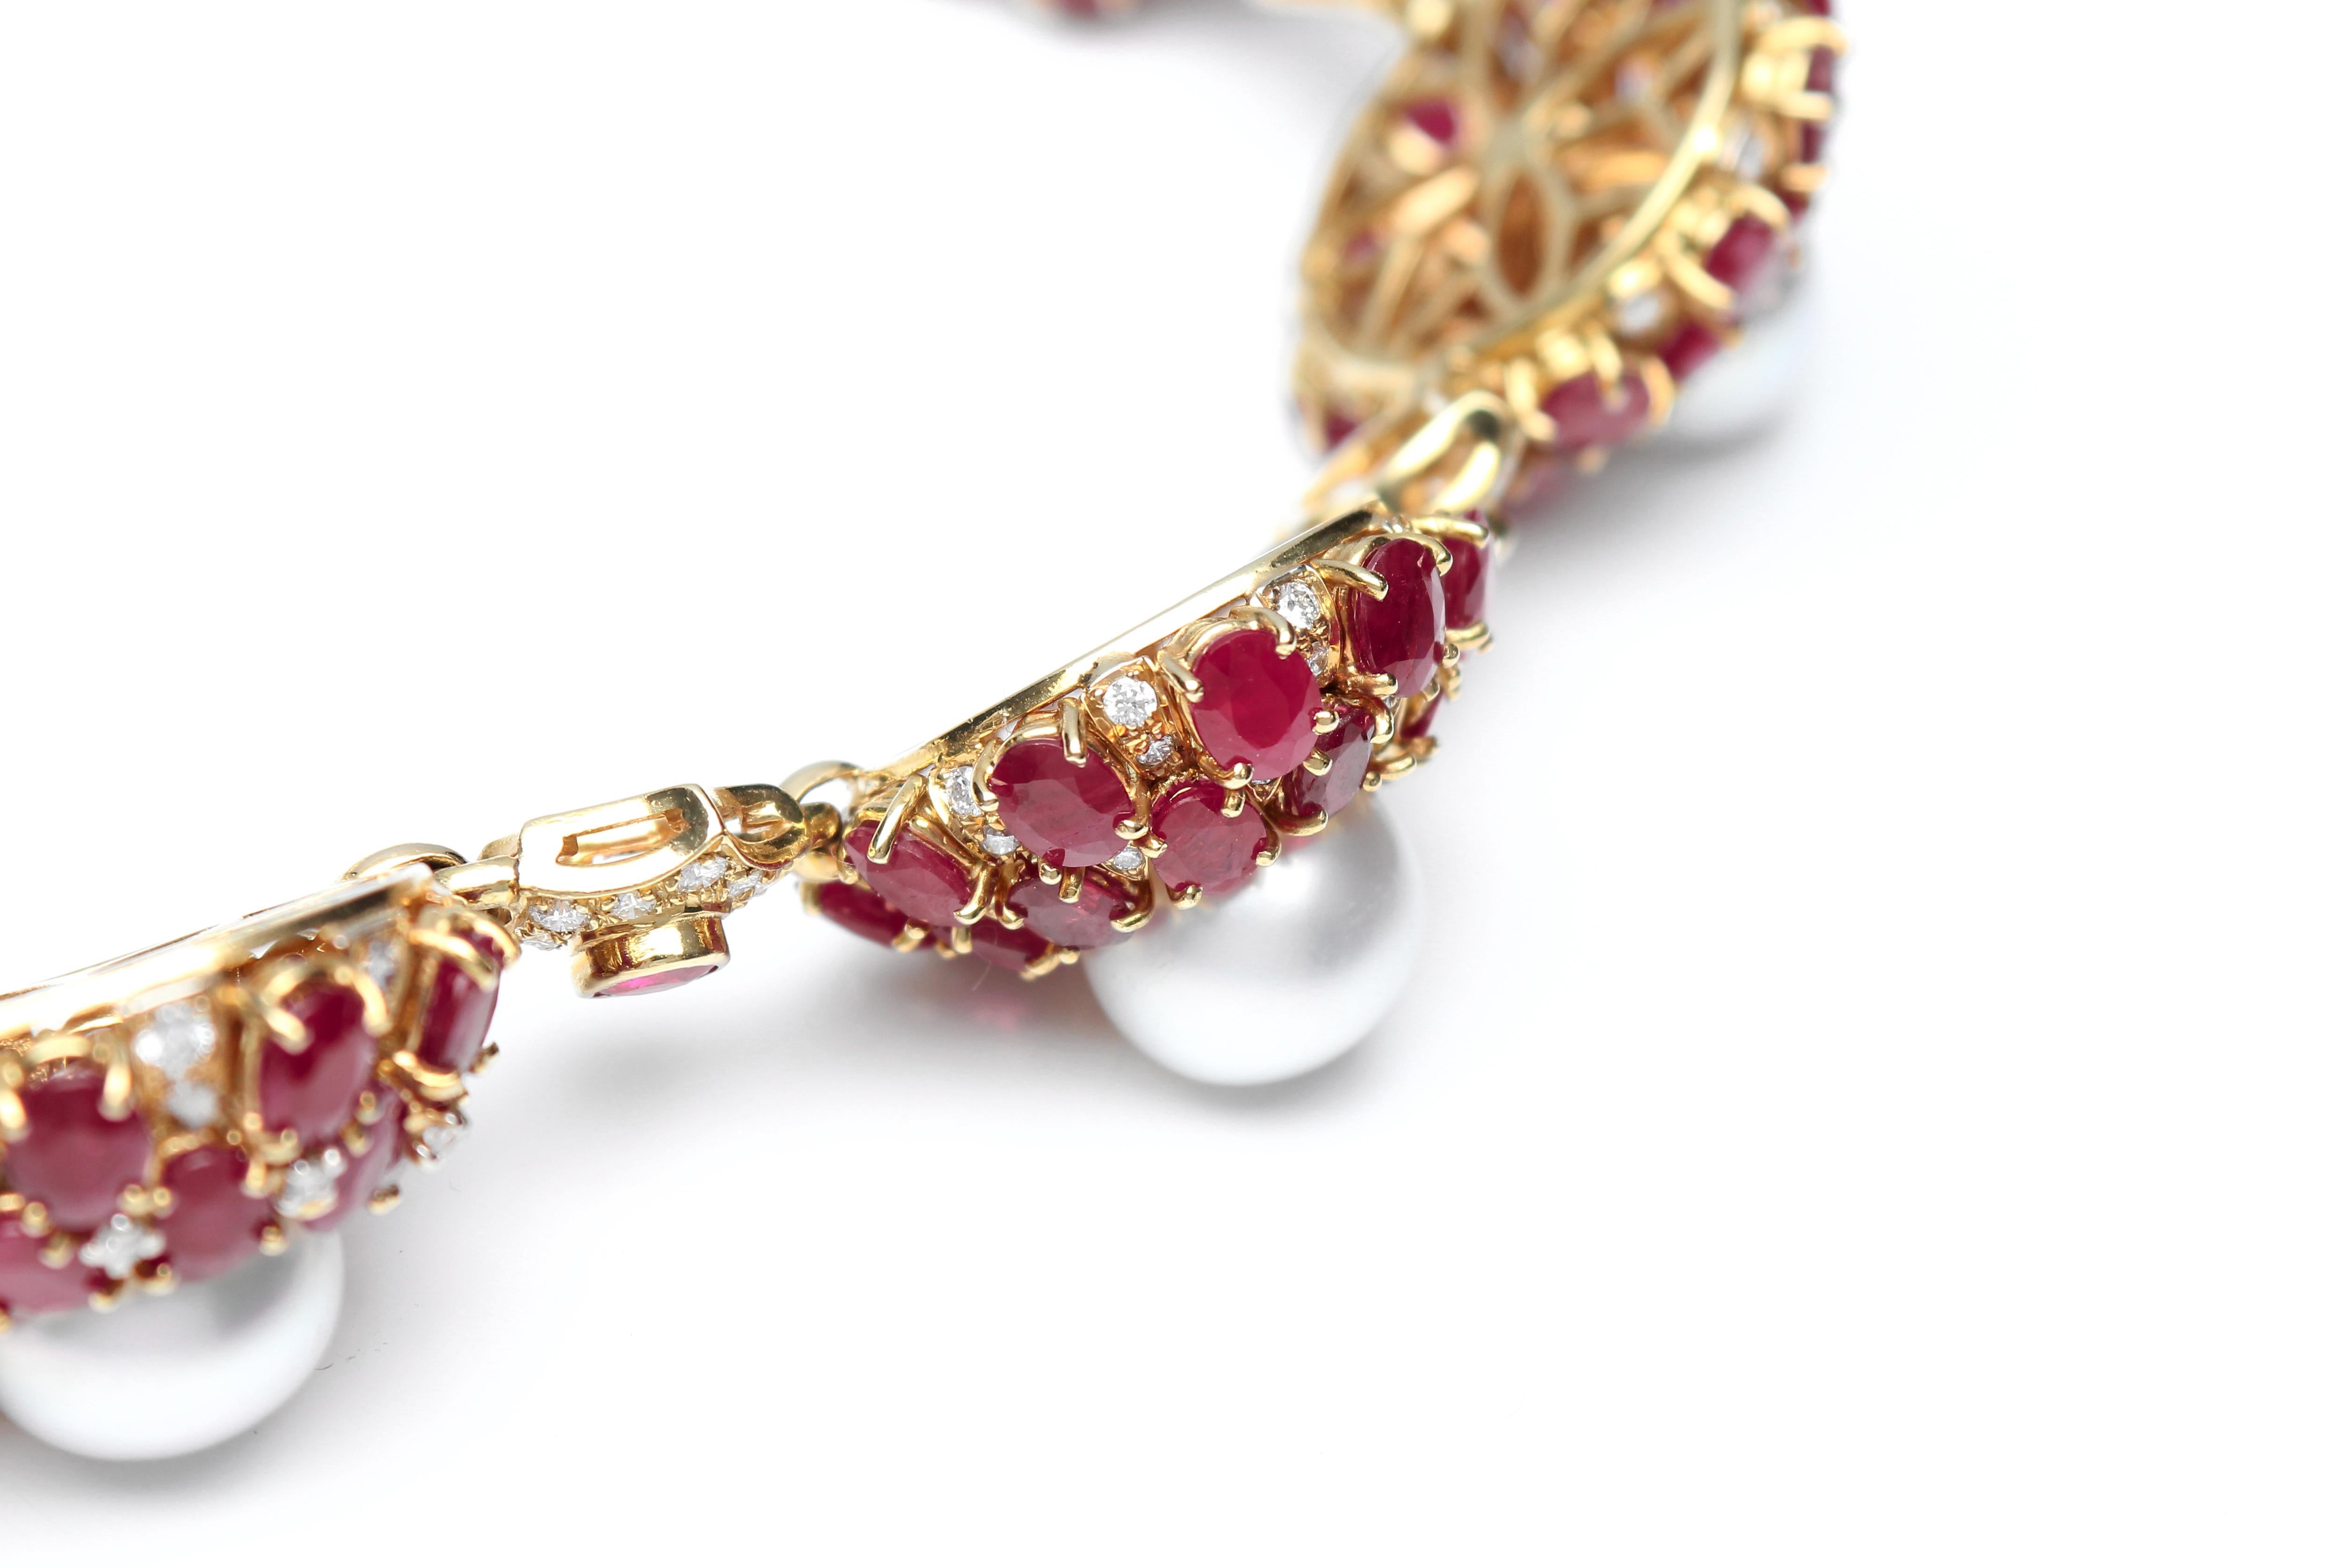 Necklace with Rubies, Pearls and Diamonds in 18 Karat Yellow Gold 7